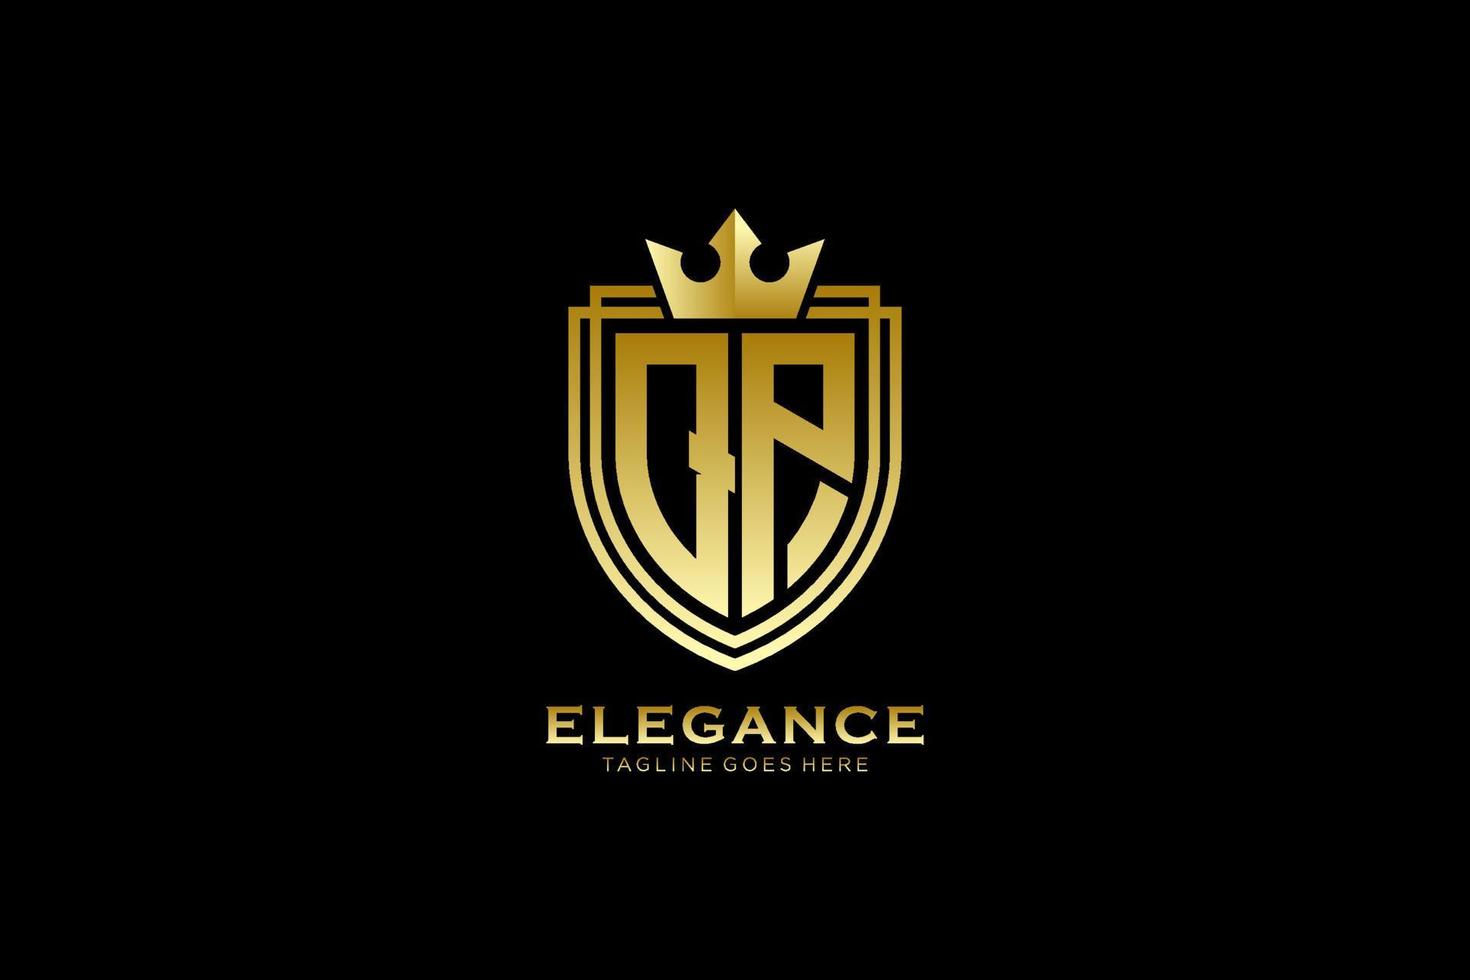 initial QP elegant luxury monogram logo or badge template with scrolls and royal crown - perfect for luxurious branding projects vector